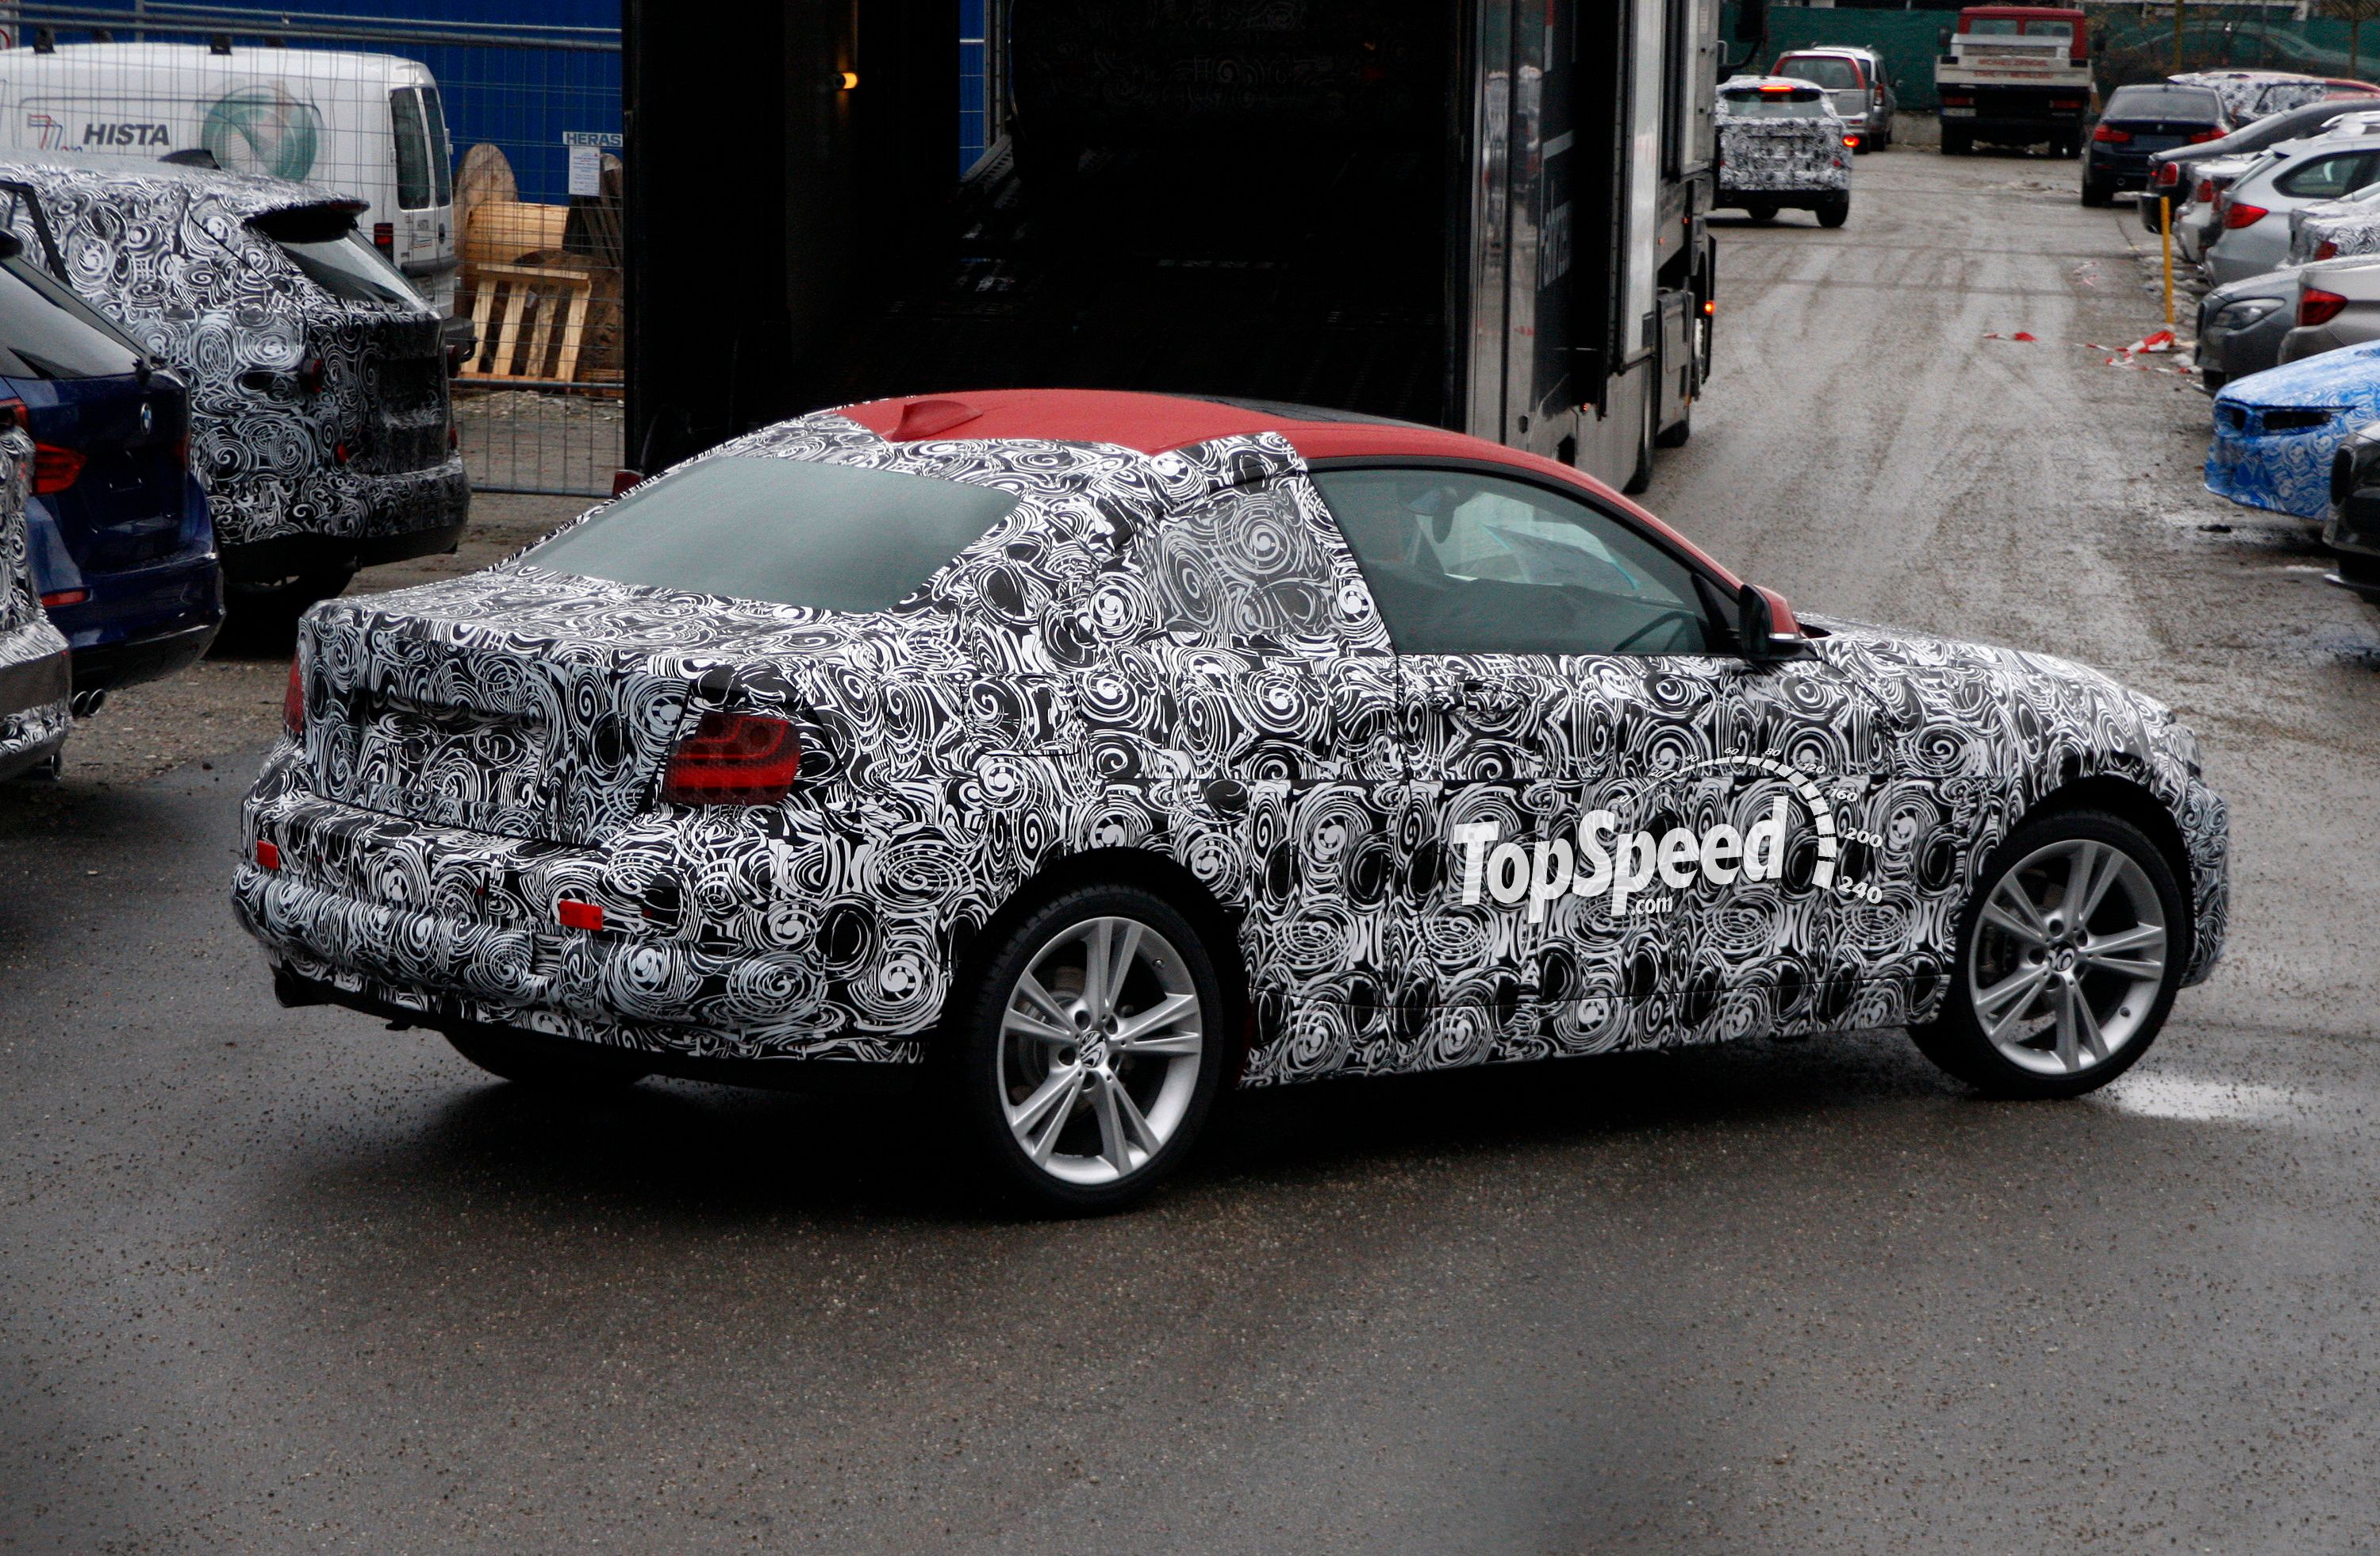 2014 - 2015 BMW 2 Series Coupe